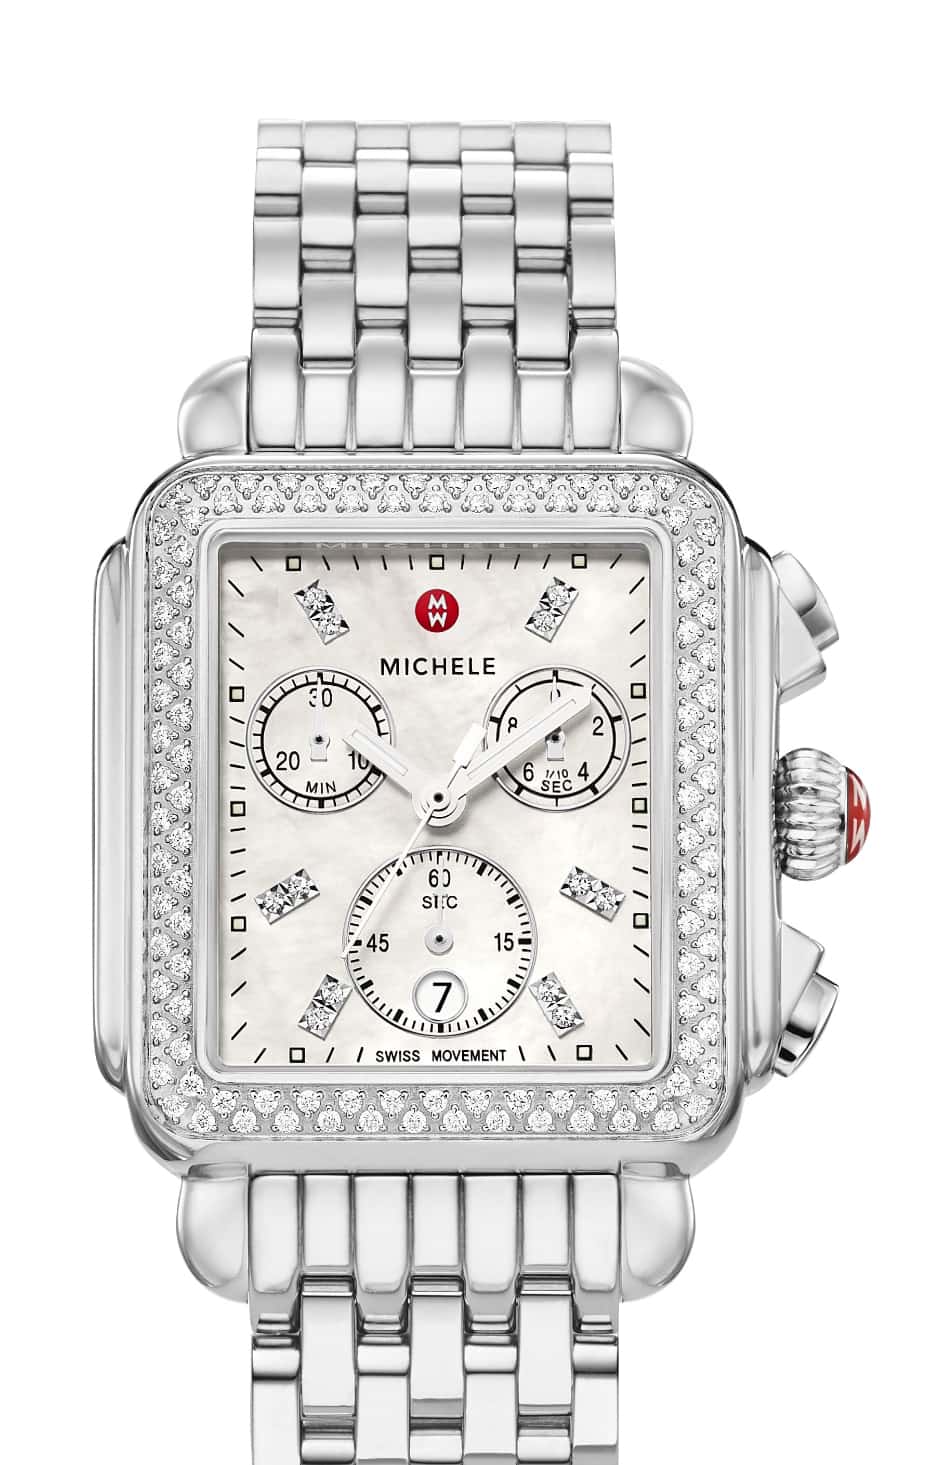 Iconic Deco watch in stainless featuring mother-of-pearl dial, diamond-covered bezel and signature seven-link bracelet.